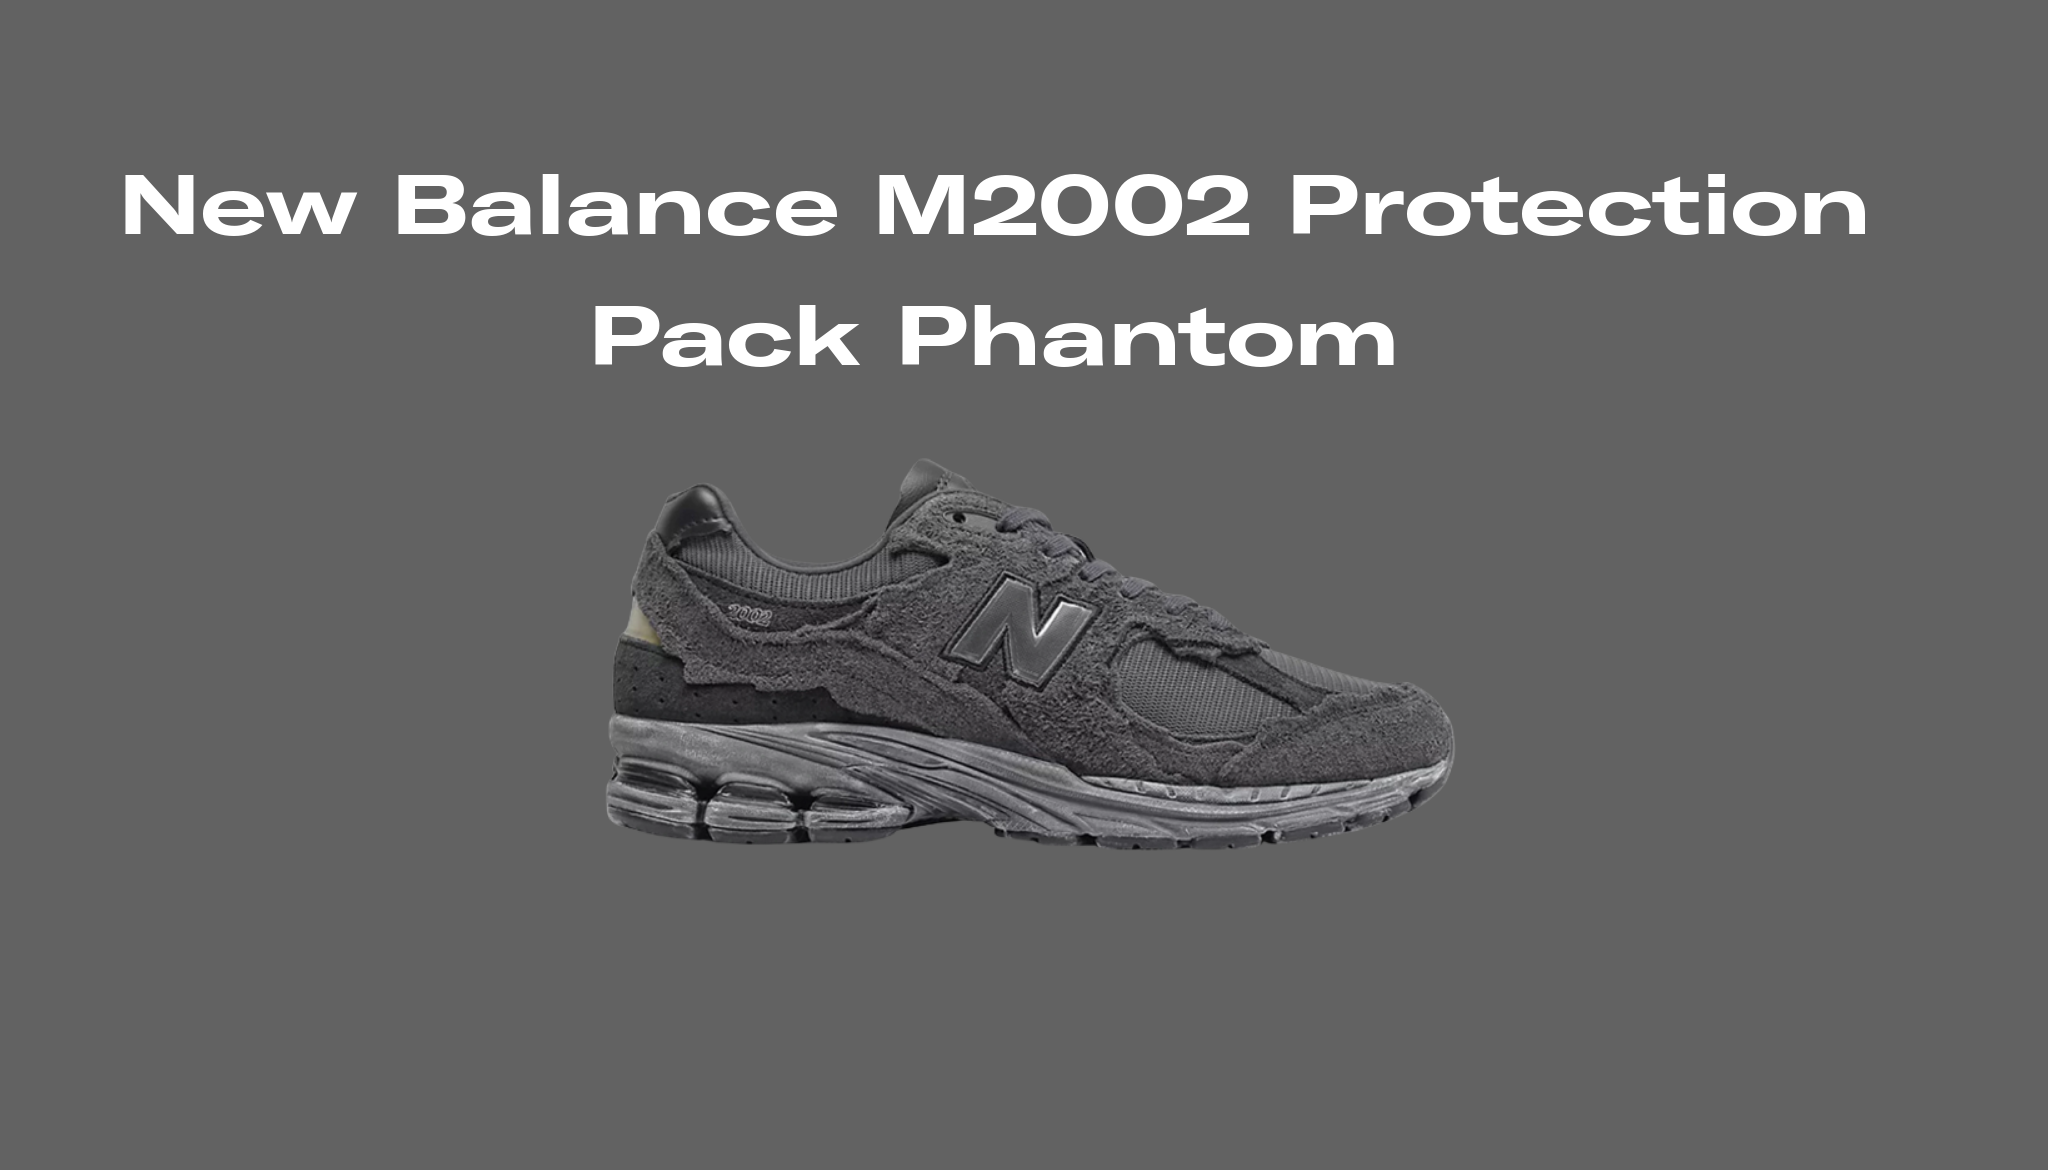 Release Info for New Balance M2002 Protection Pack Phantom